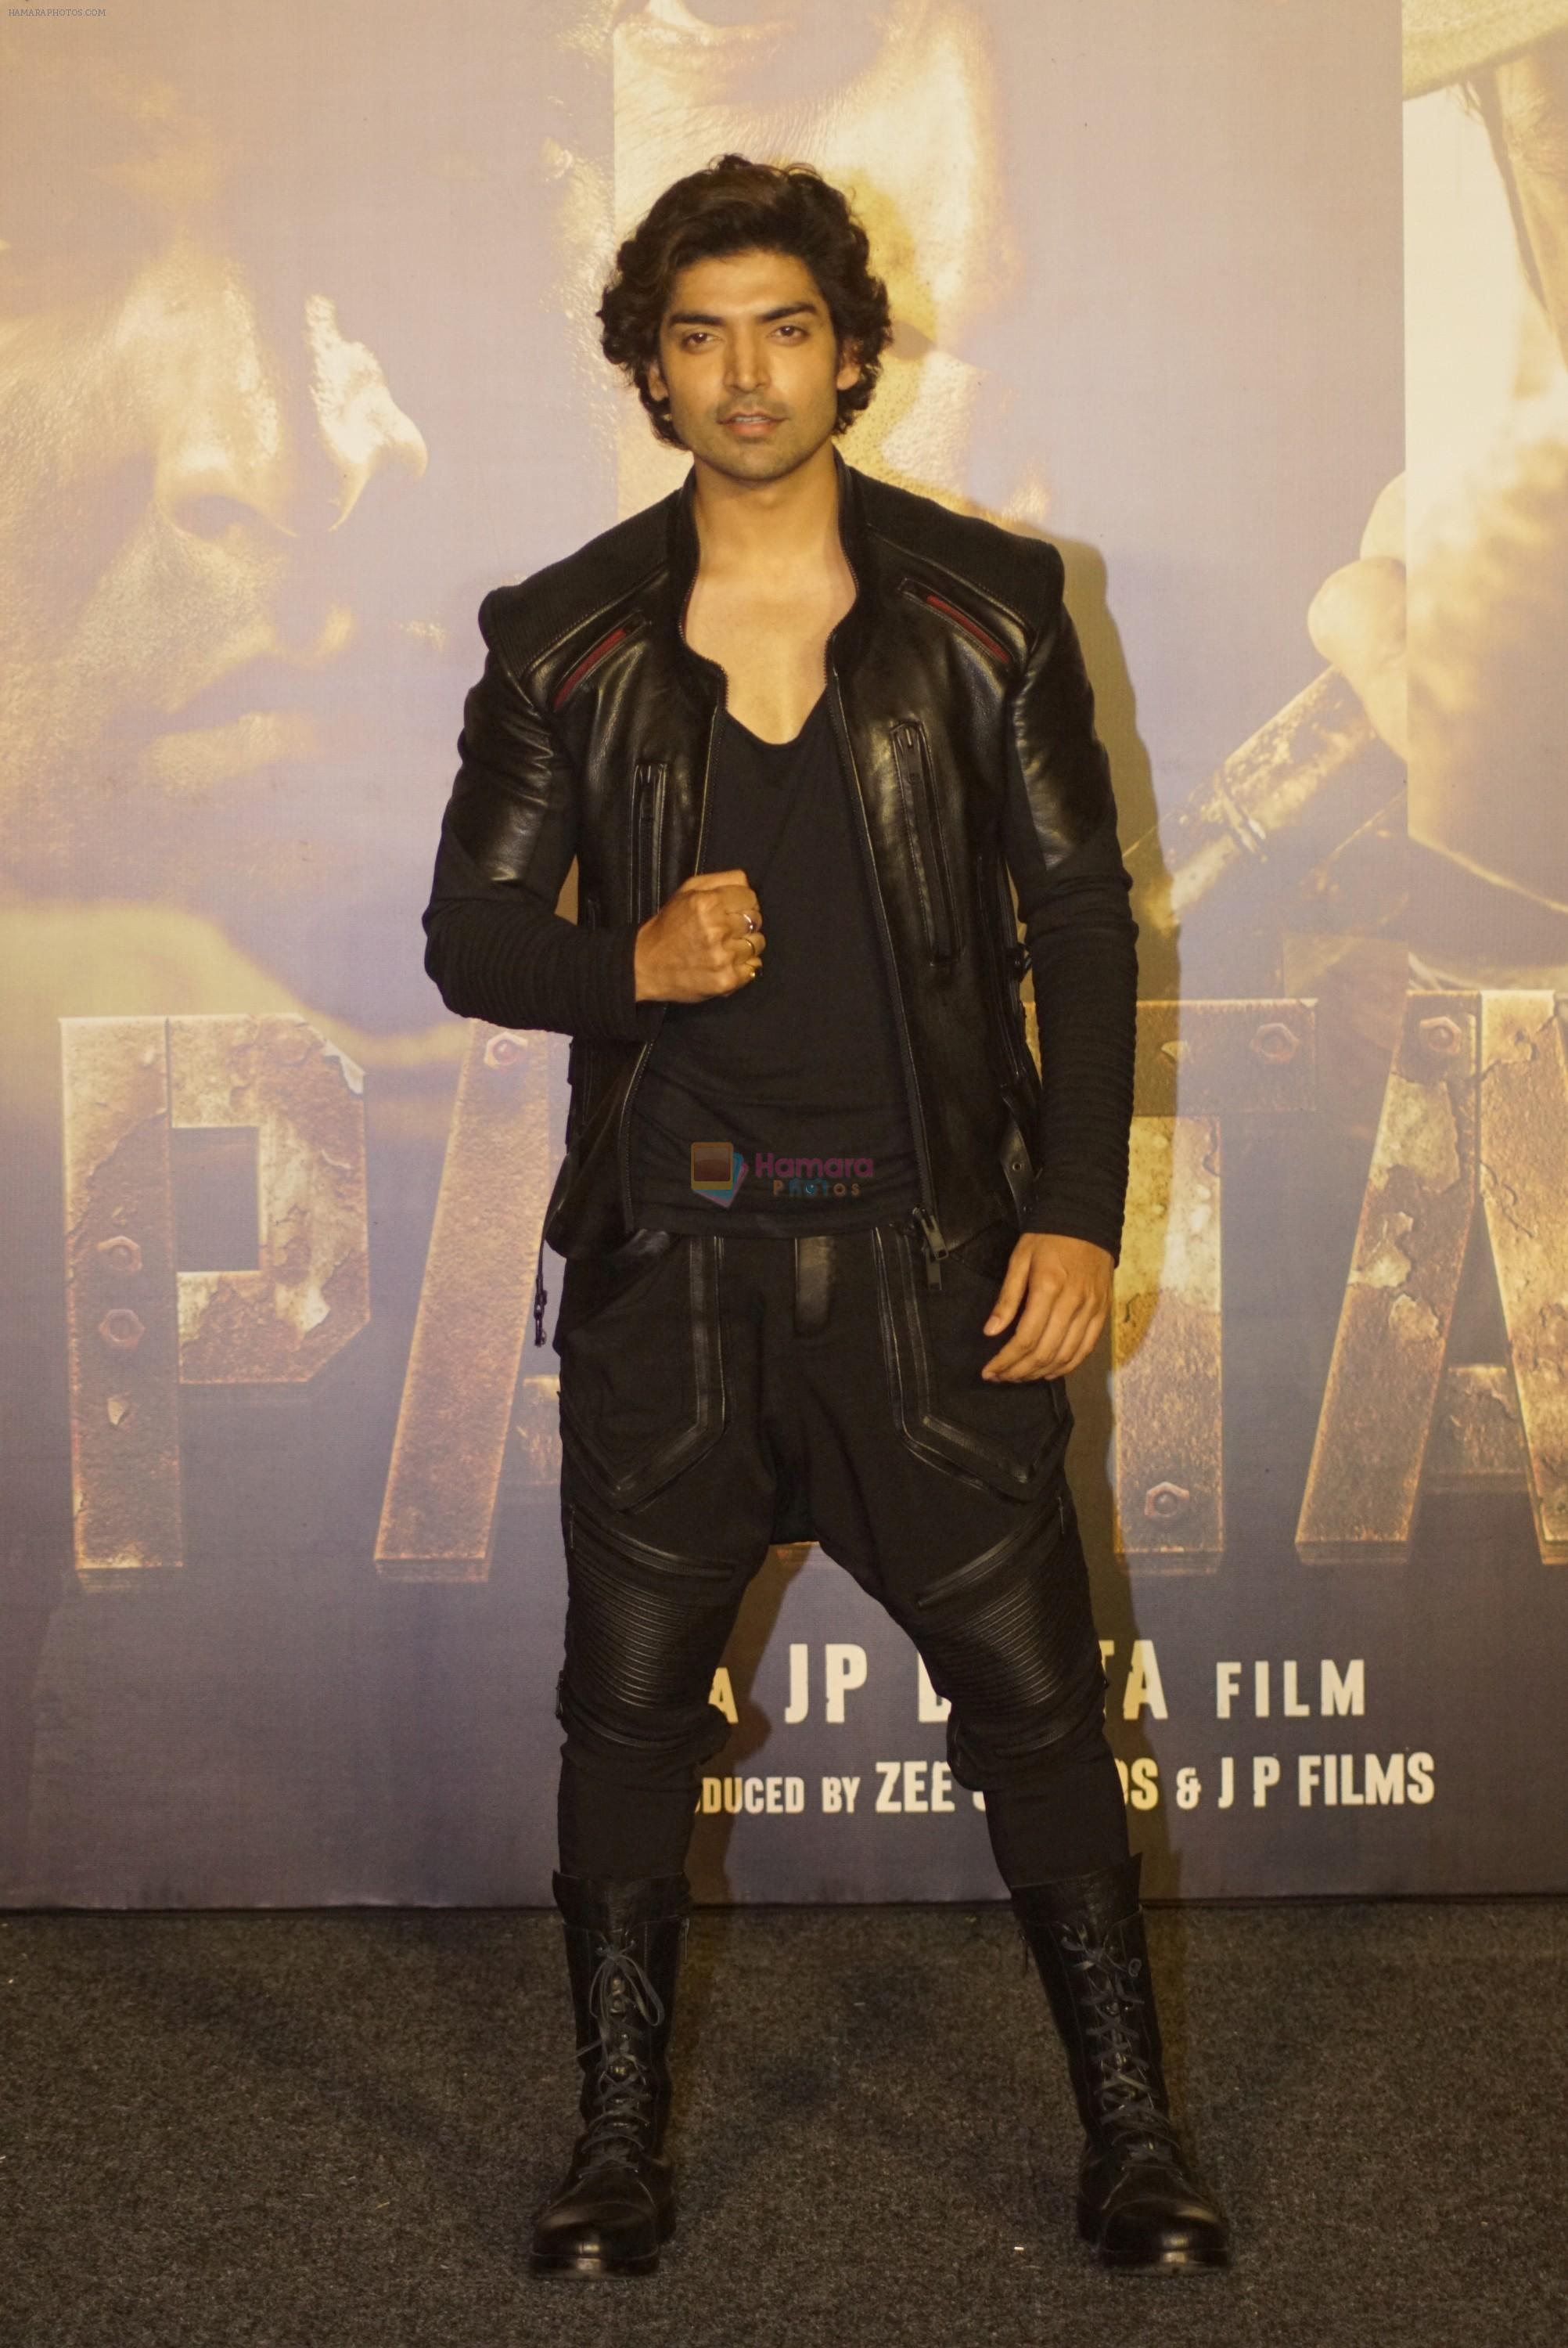 Gurmeet Choudhary at the Trailer launch Of Film Paltan on 2nd Aug 2018